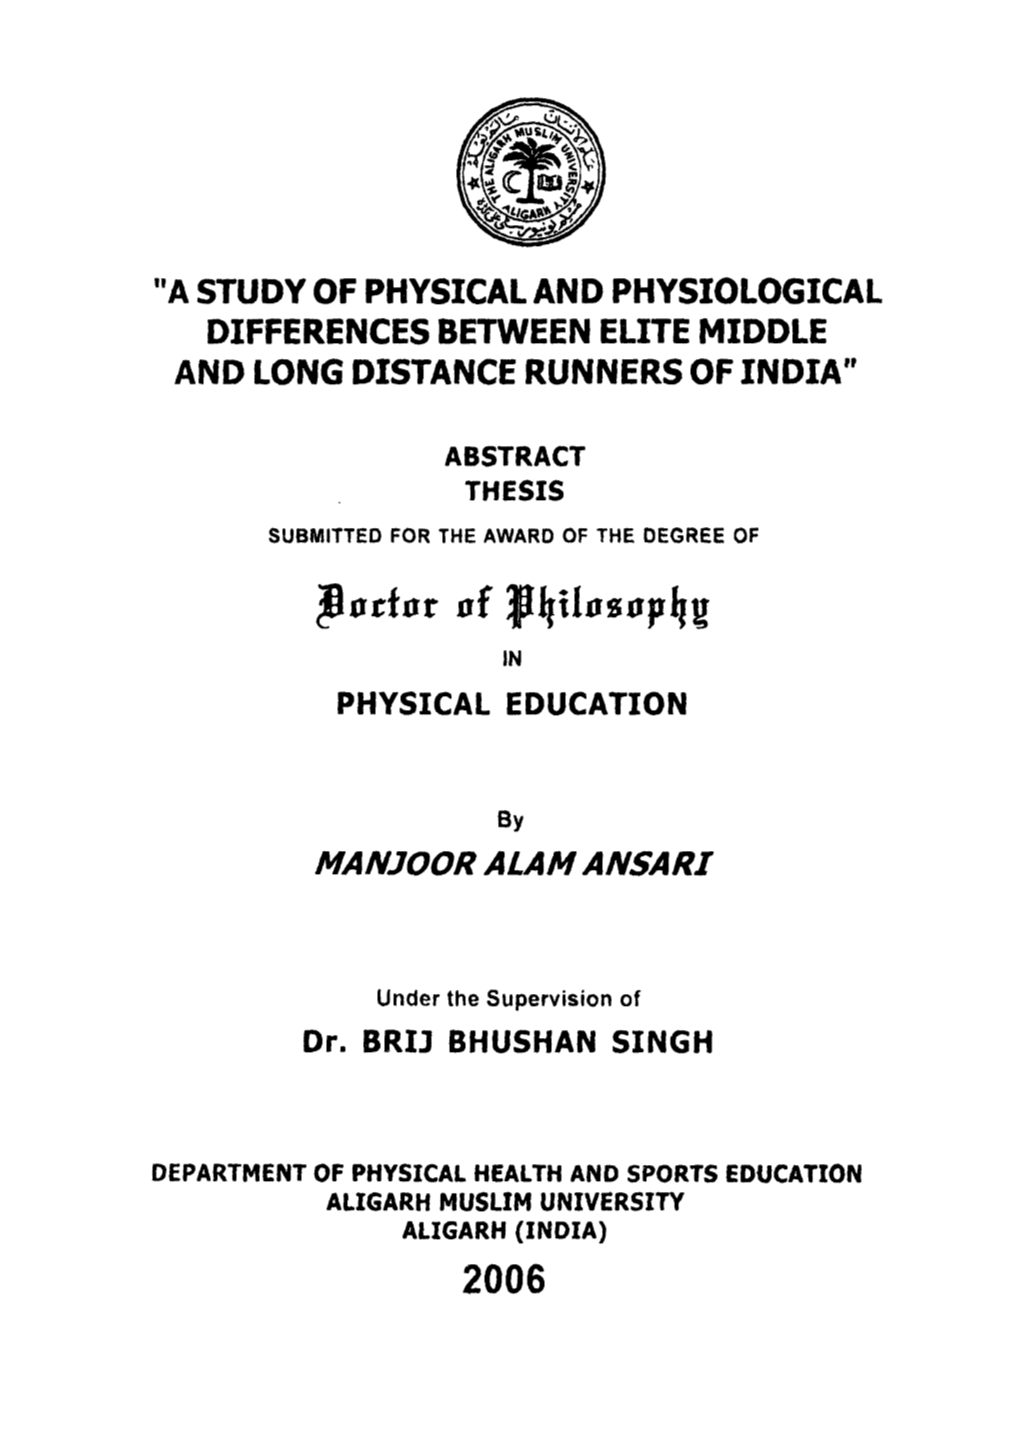 "A Study of Physical and Physiological Differences Between Elite Middle and Long Distance Runners of India"